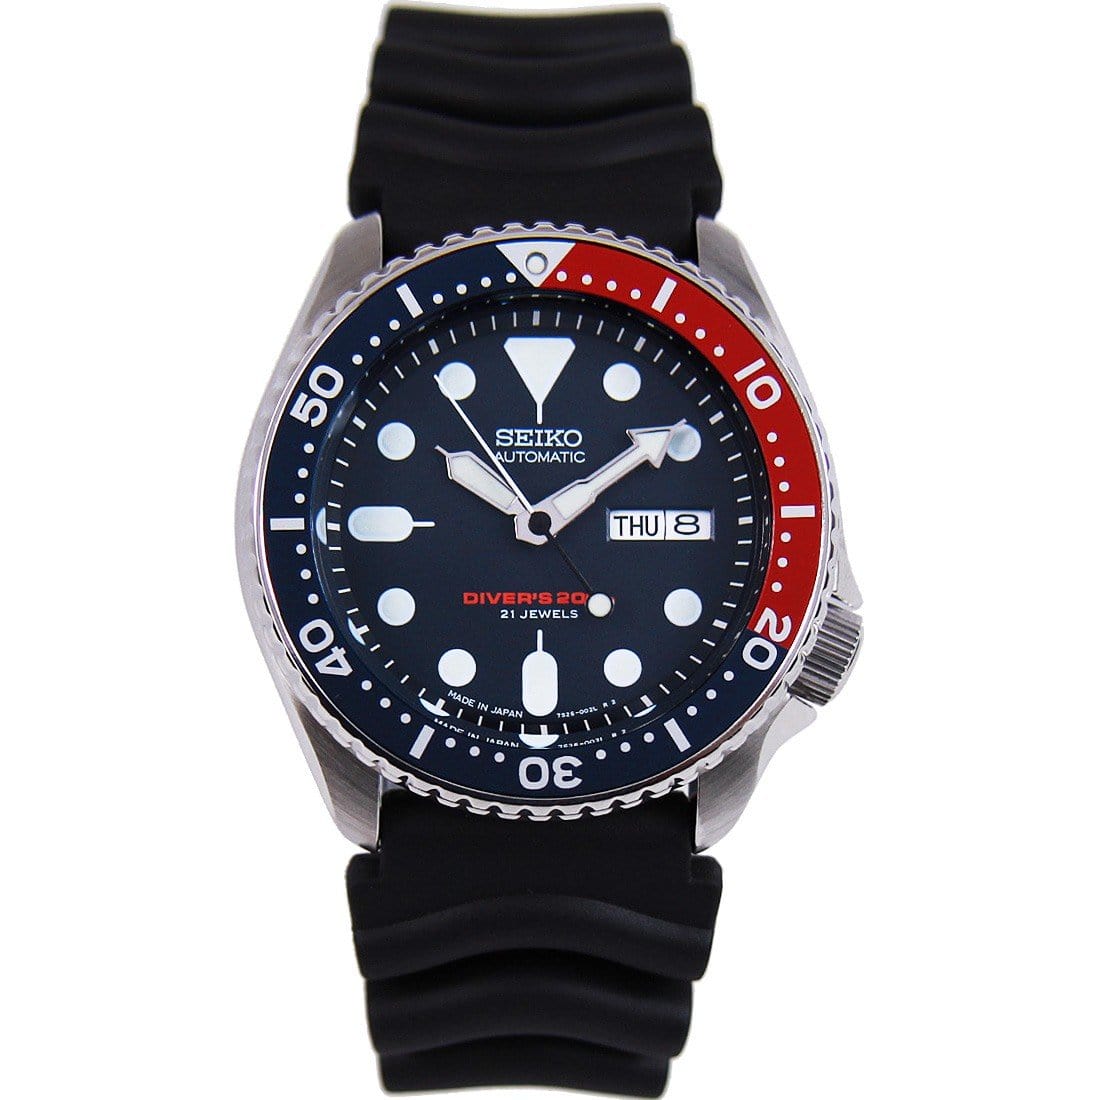 SKX009J SKX009J1 Seiko Automatic Japan Made Male Divers Watch with Extra Strap